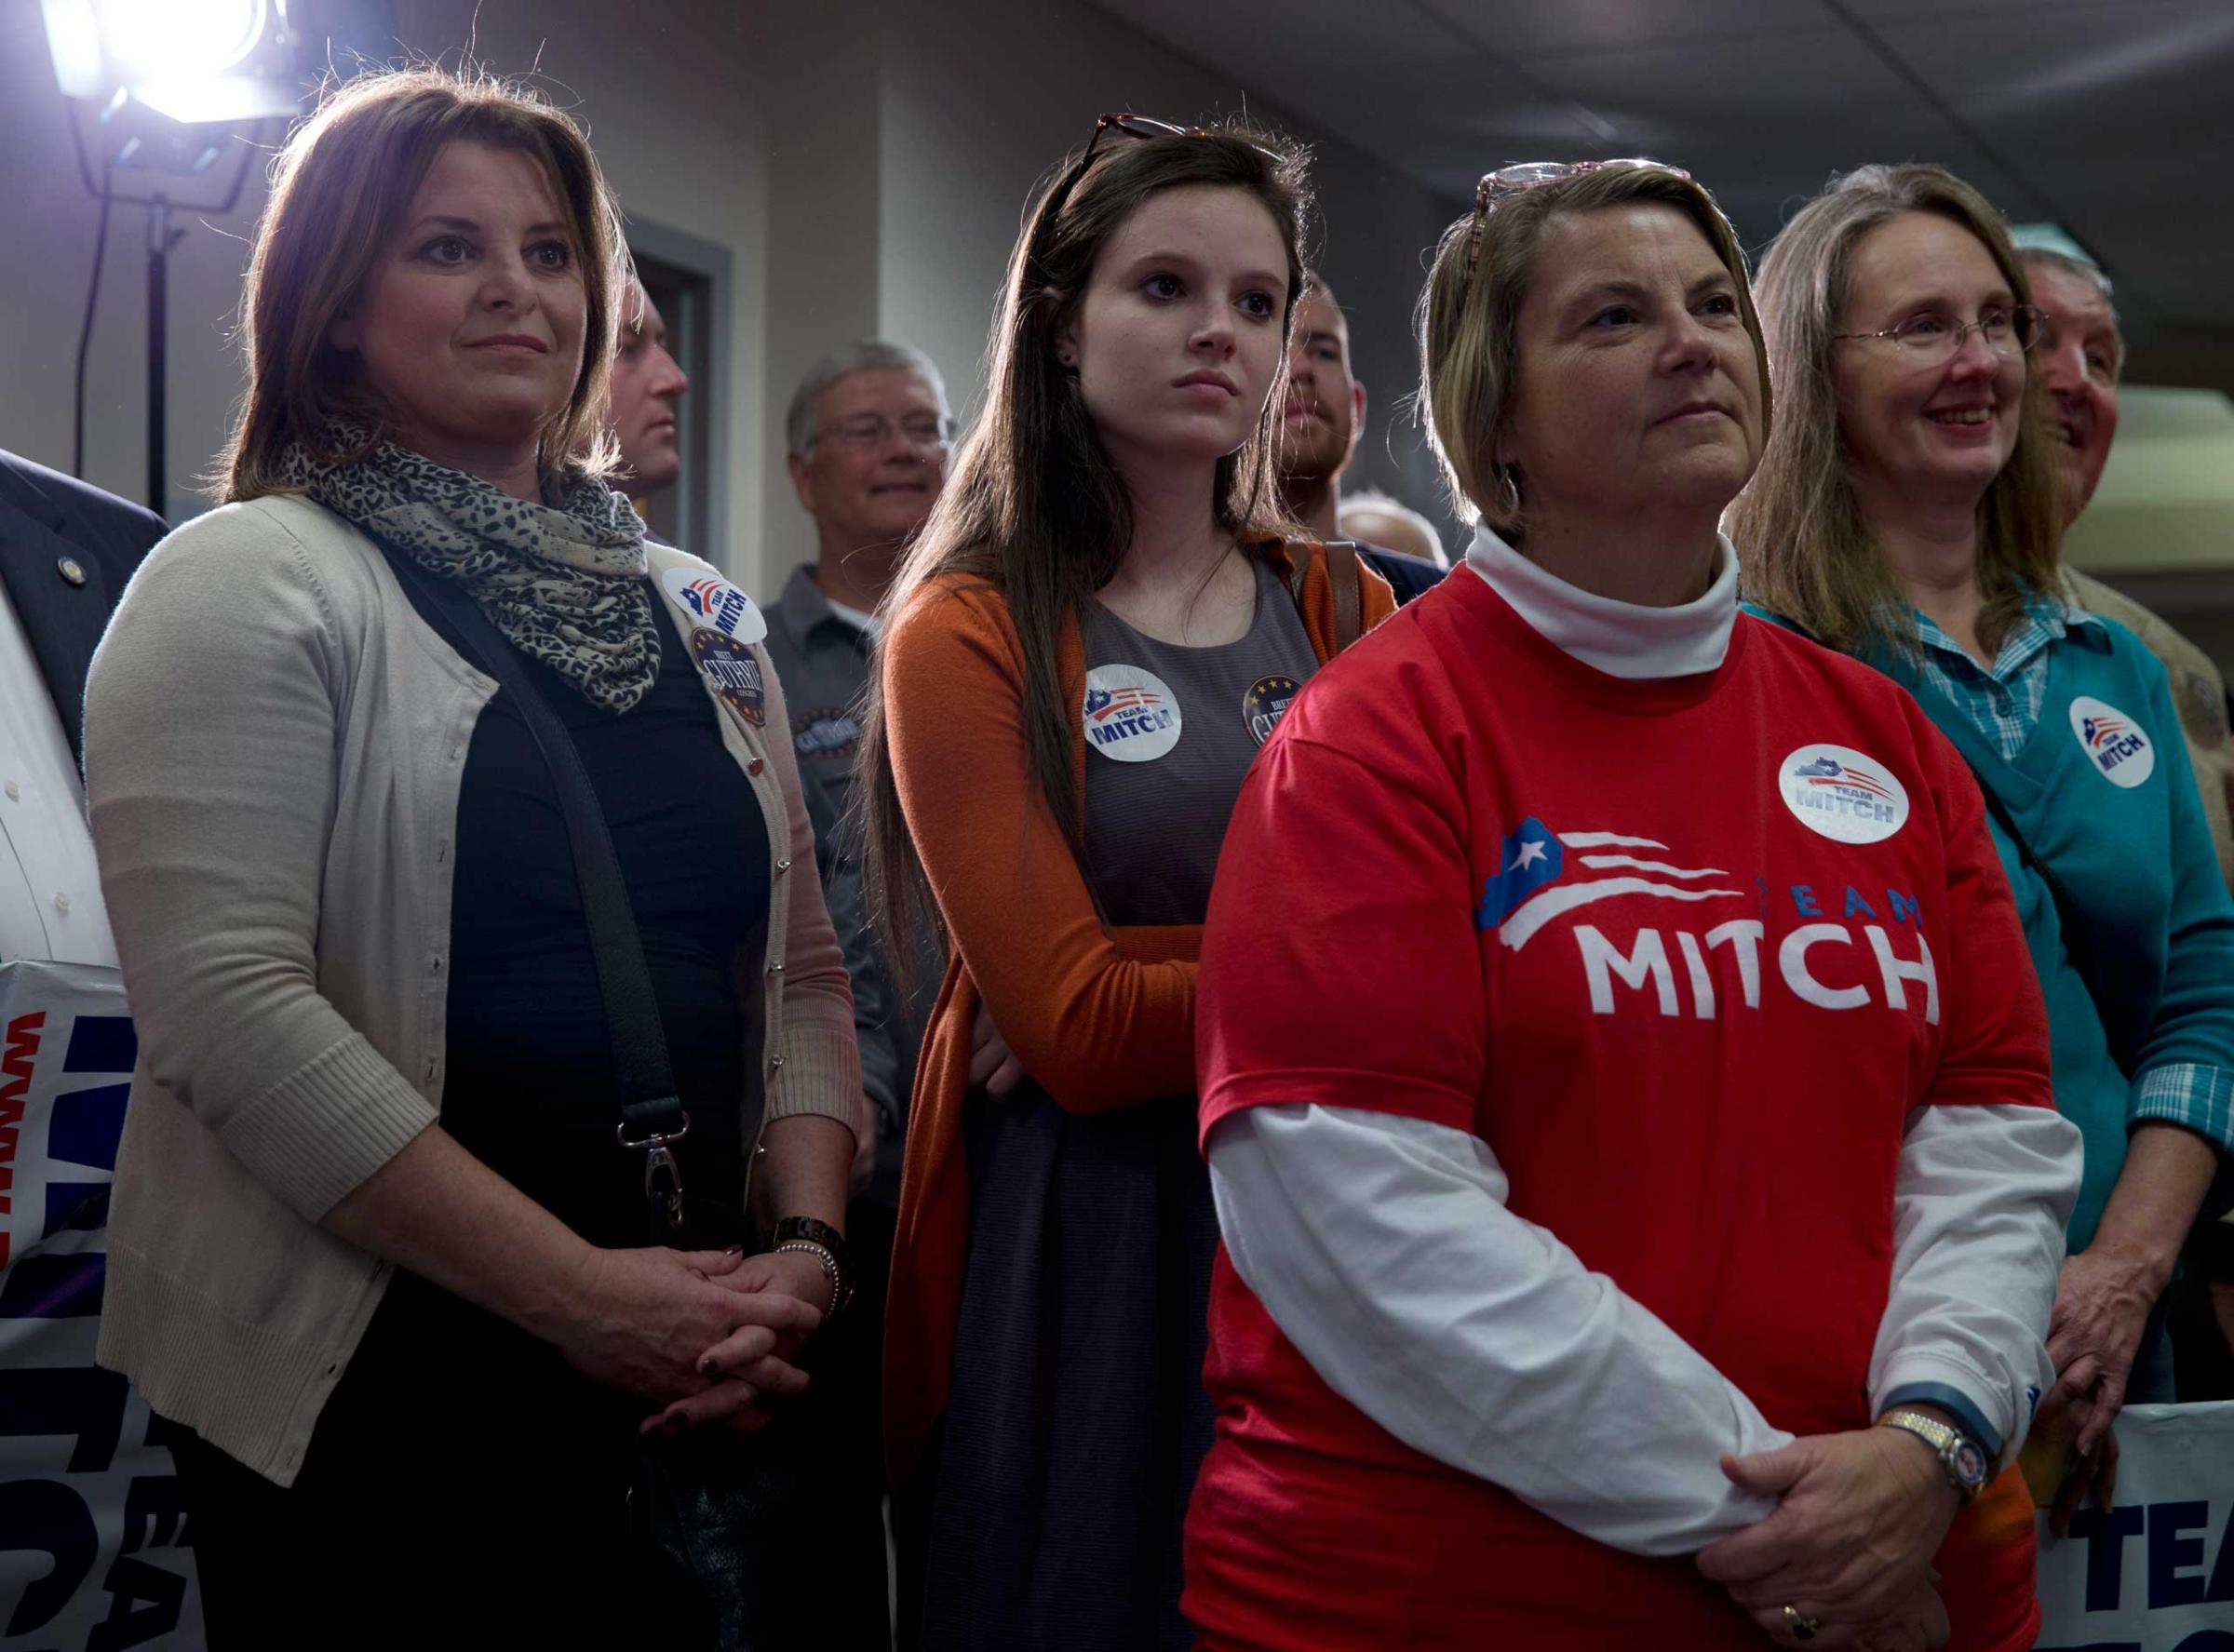 Supporters of Sen. Mitch McConnell at campaign rally at the Bowling Green-Warren Co. Regional Airport in Bowling Green, Ky. on Nov. 3, 2014.